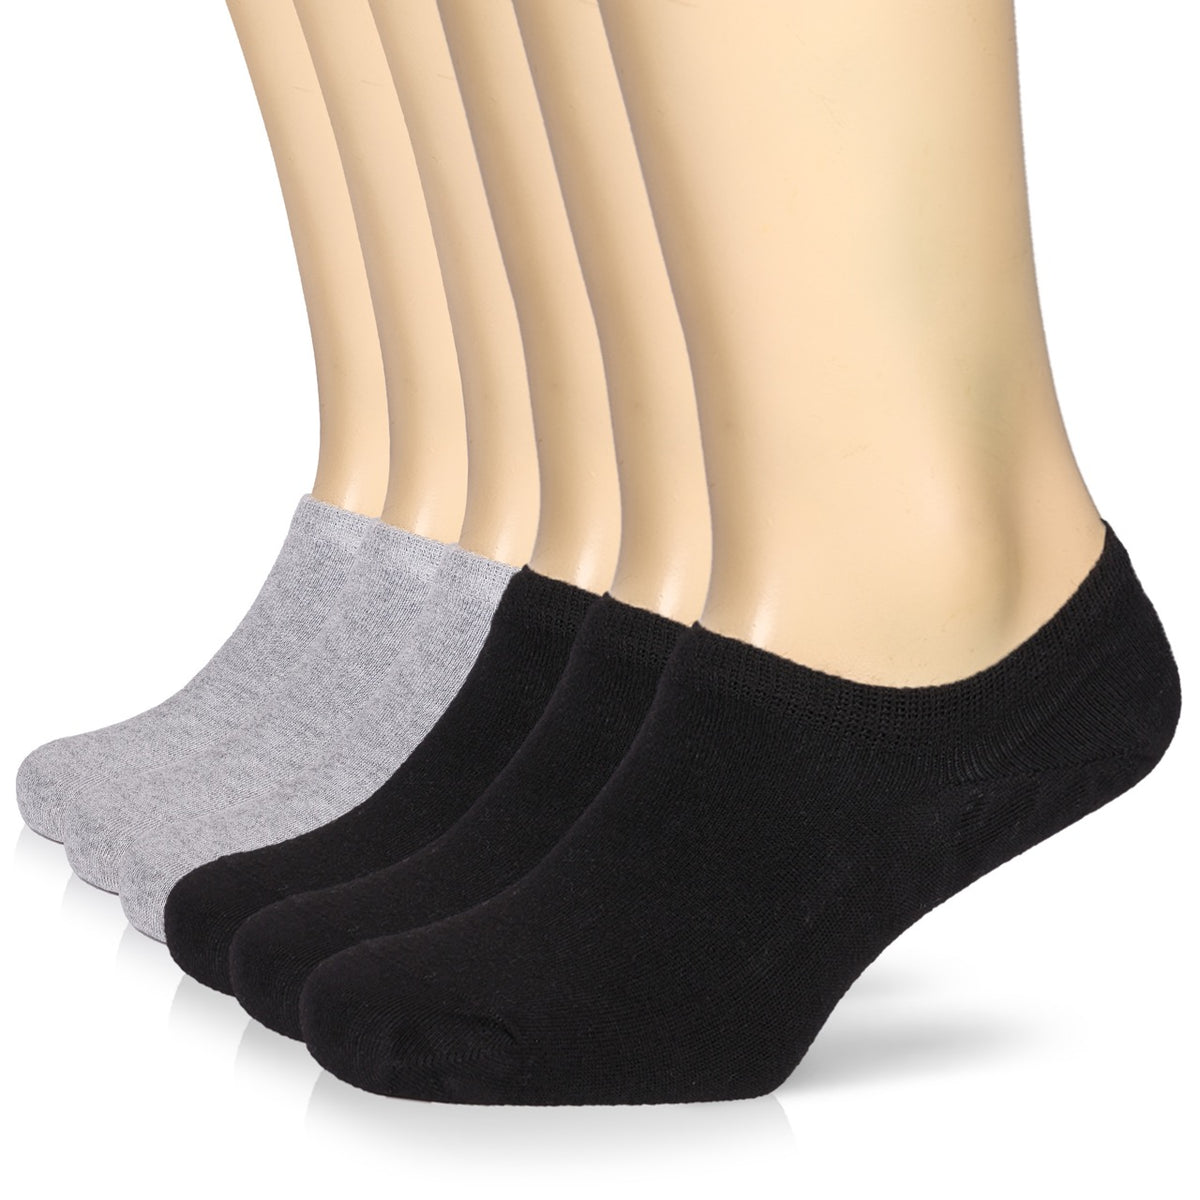 Three black and three gray Bamboo No-Show Men's Socks are displayed on a mannequin, offering a comfortable and sustainable choice for any outfit.